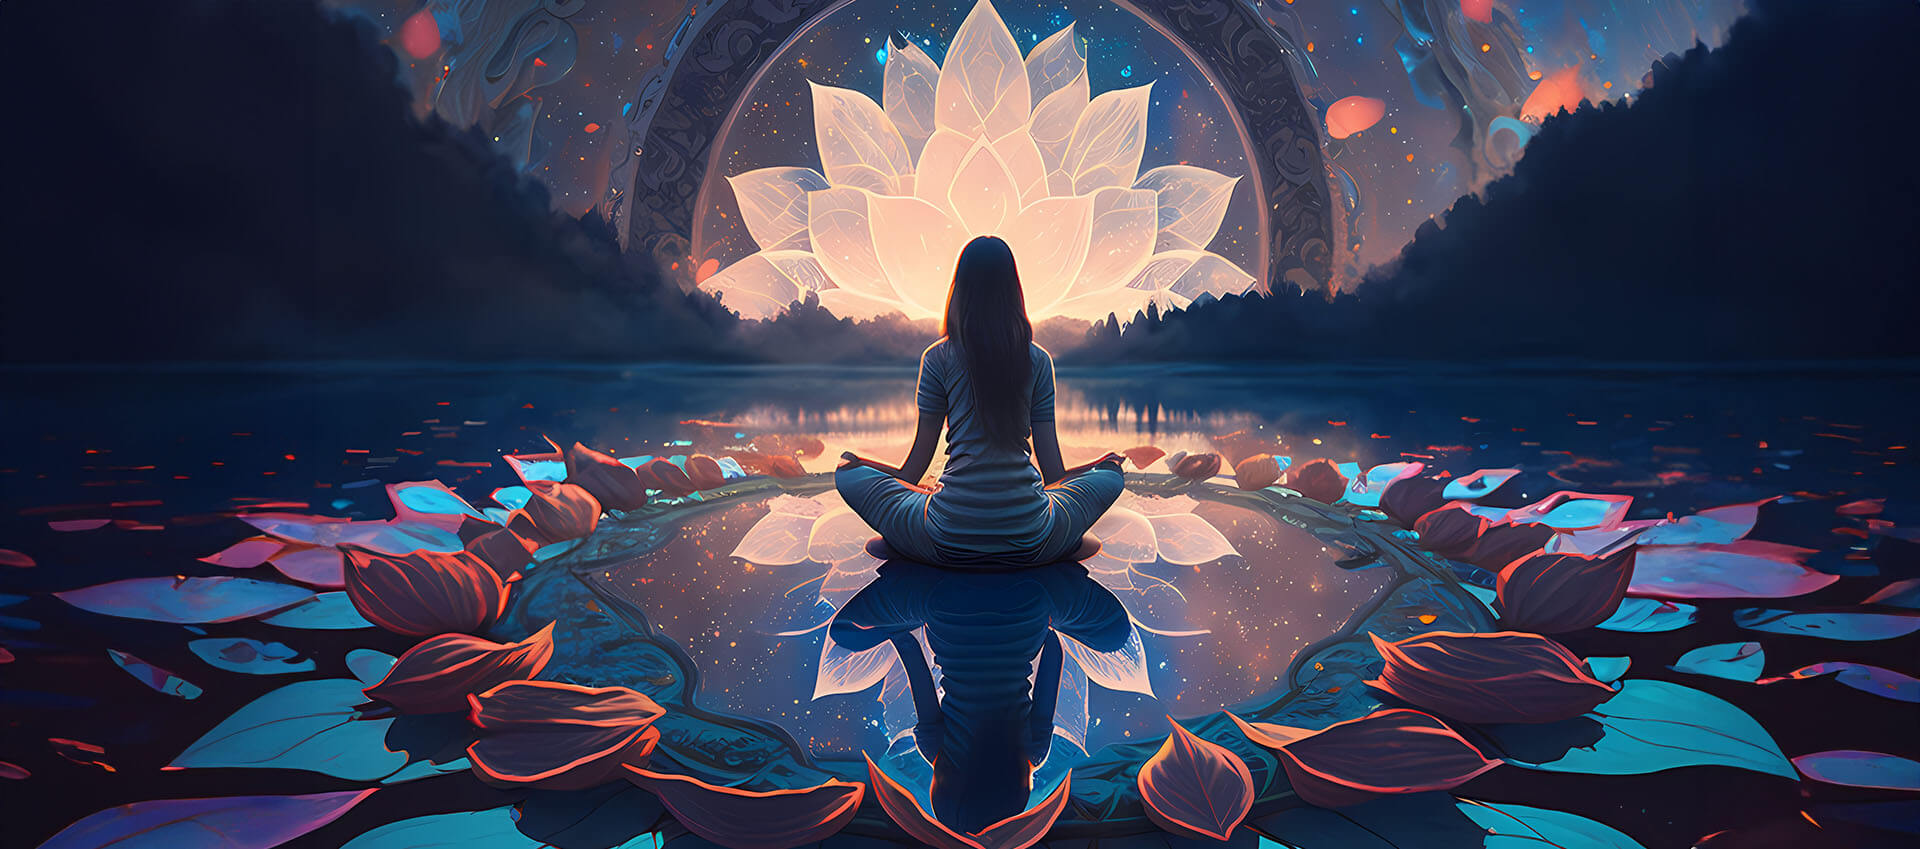 Artistic rendering of a woman meditating on a pond's surface with a lily reflection